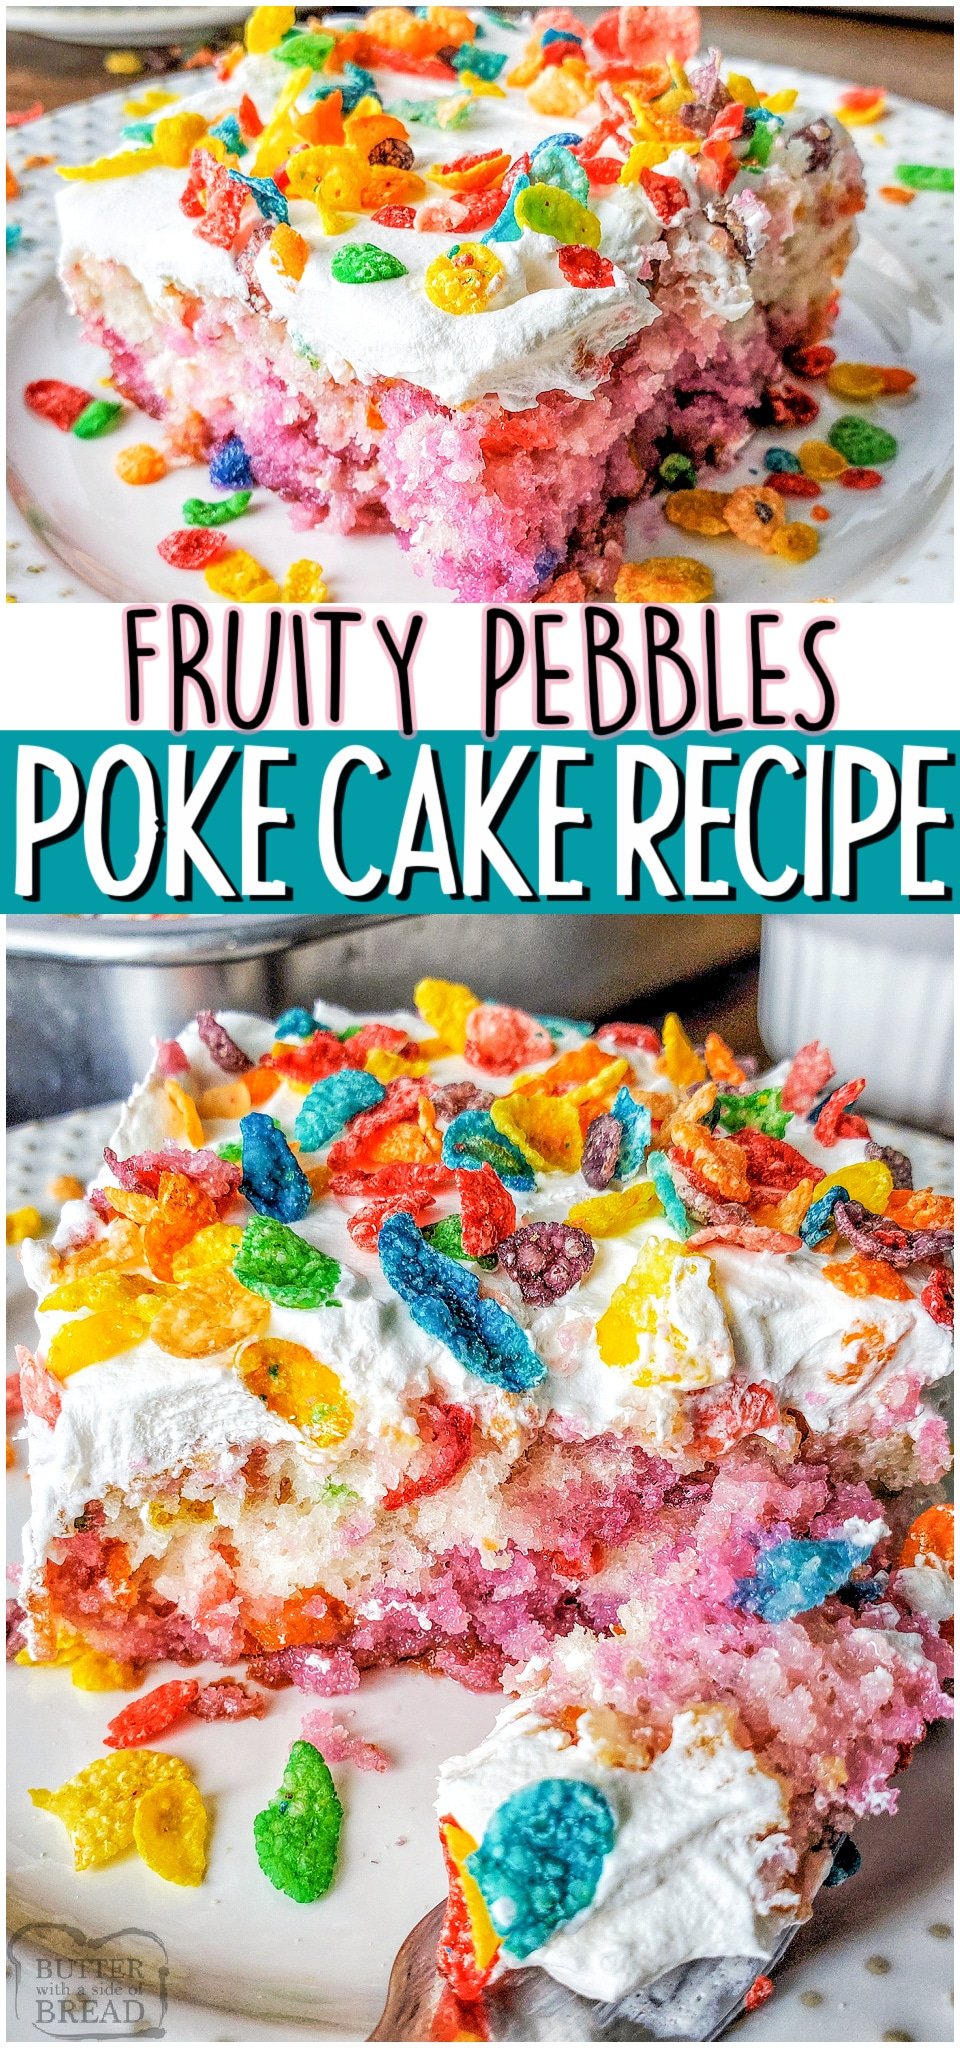 Serve immediately, or store in the refrigerator until ready to serve. #cake #pokecake #FruityPebbles #dessert #creative #rainbow #colorful #easyrecipe from BUTTER WITH A SIDE OF BREAD